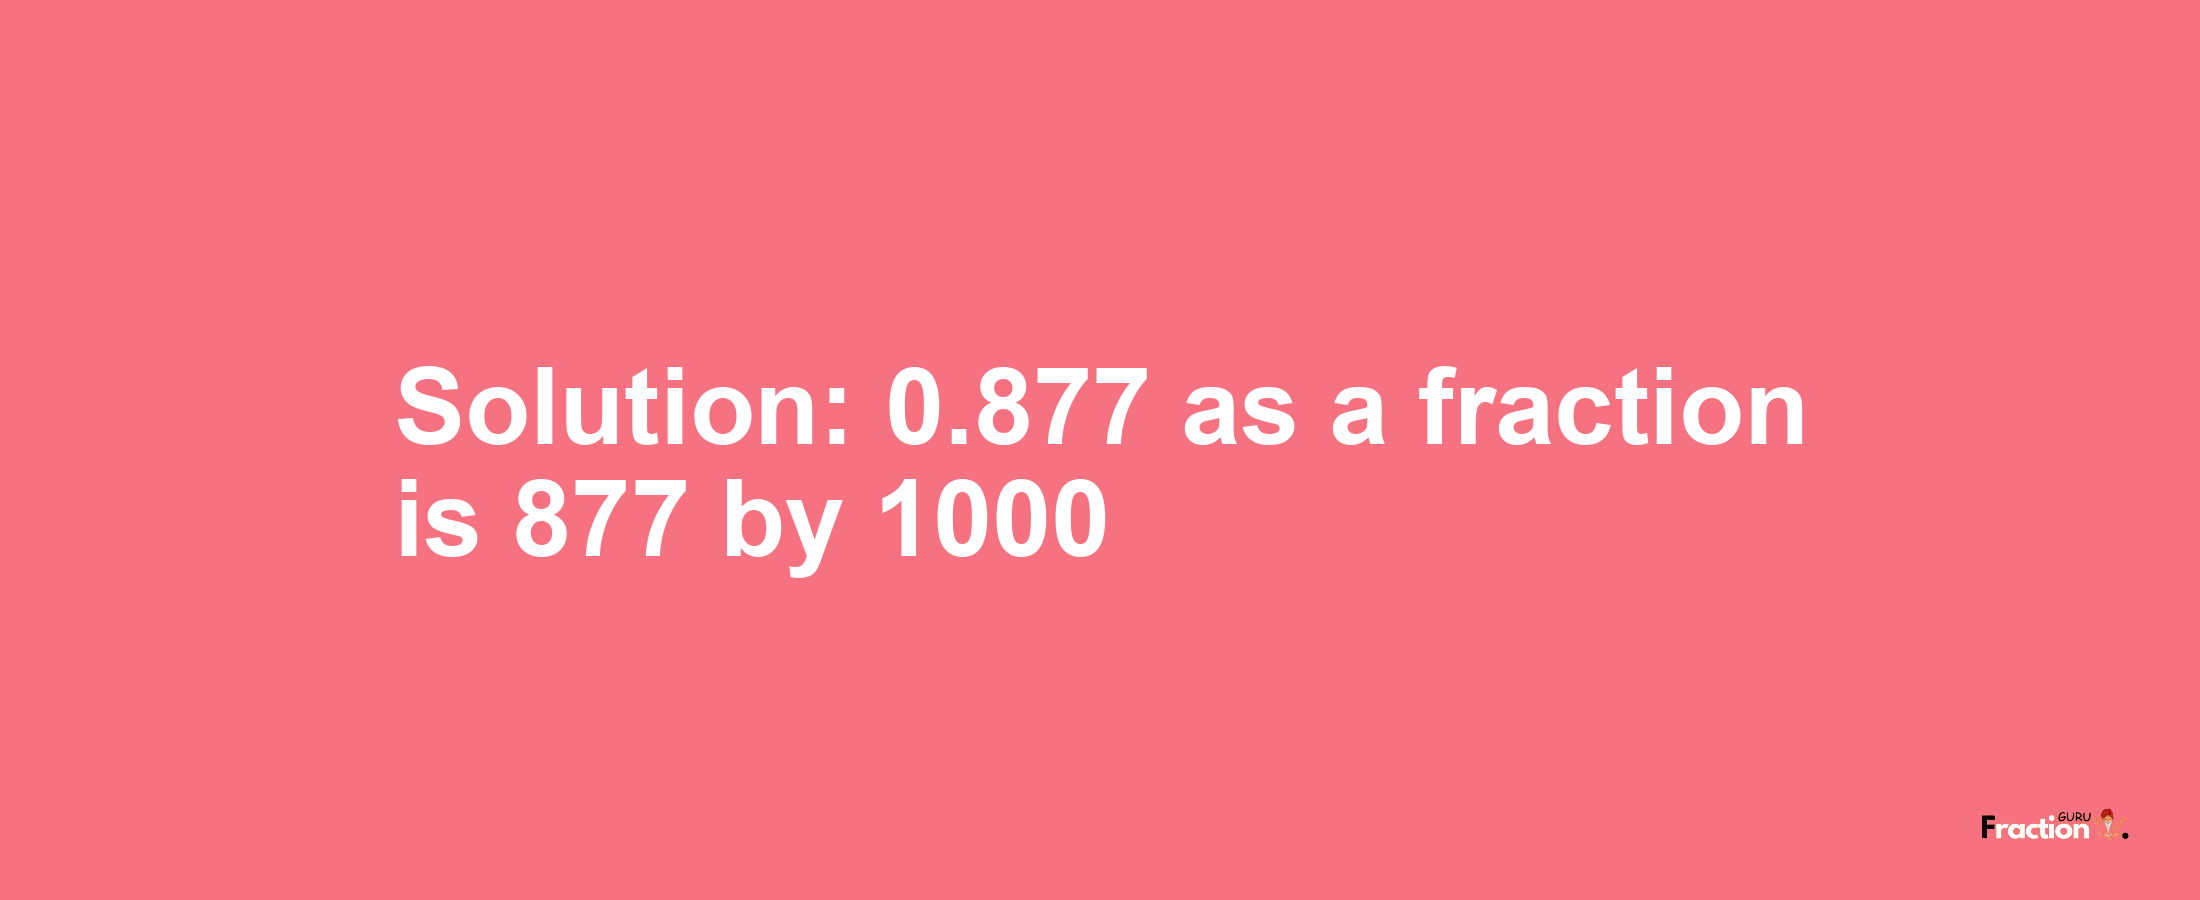 Solution:0.877 as a fraction is 877/1000